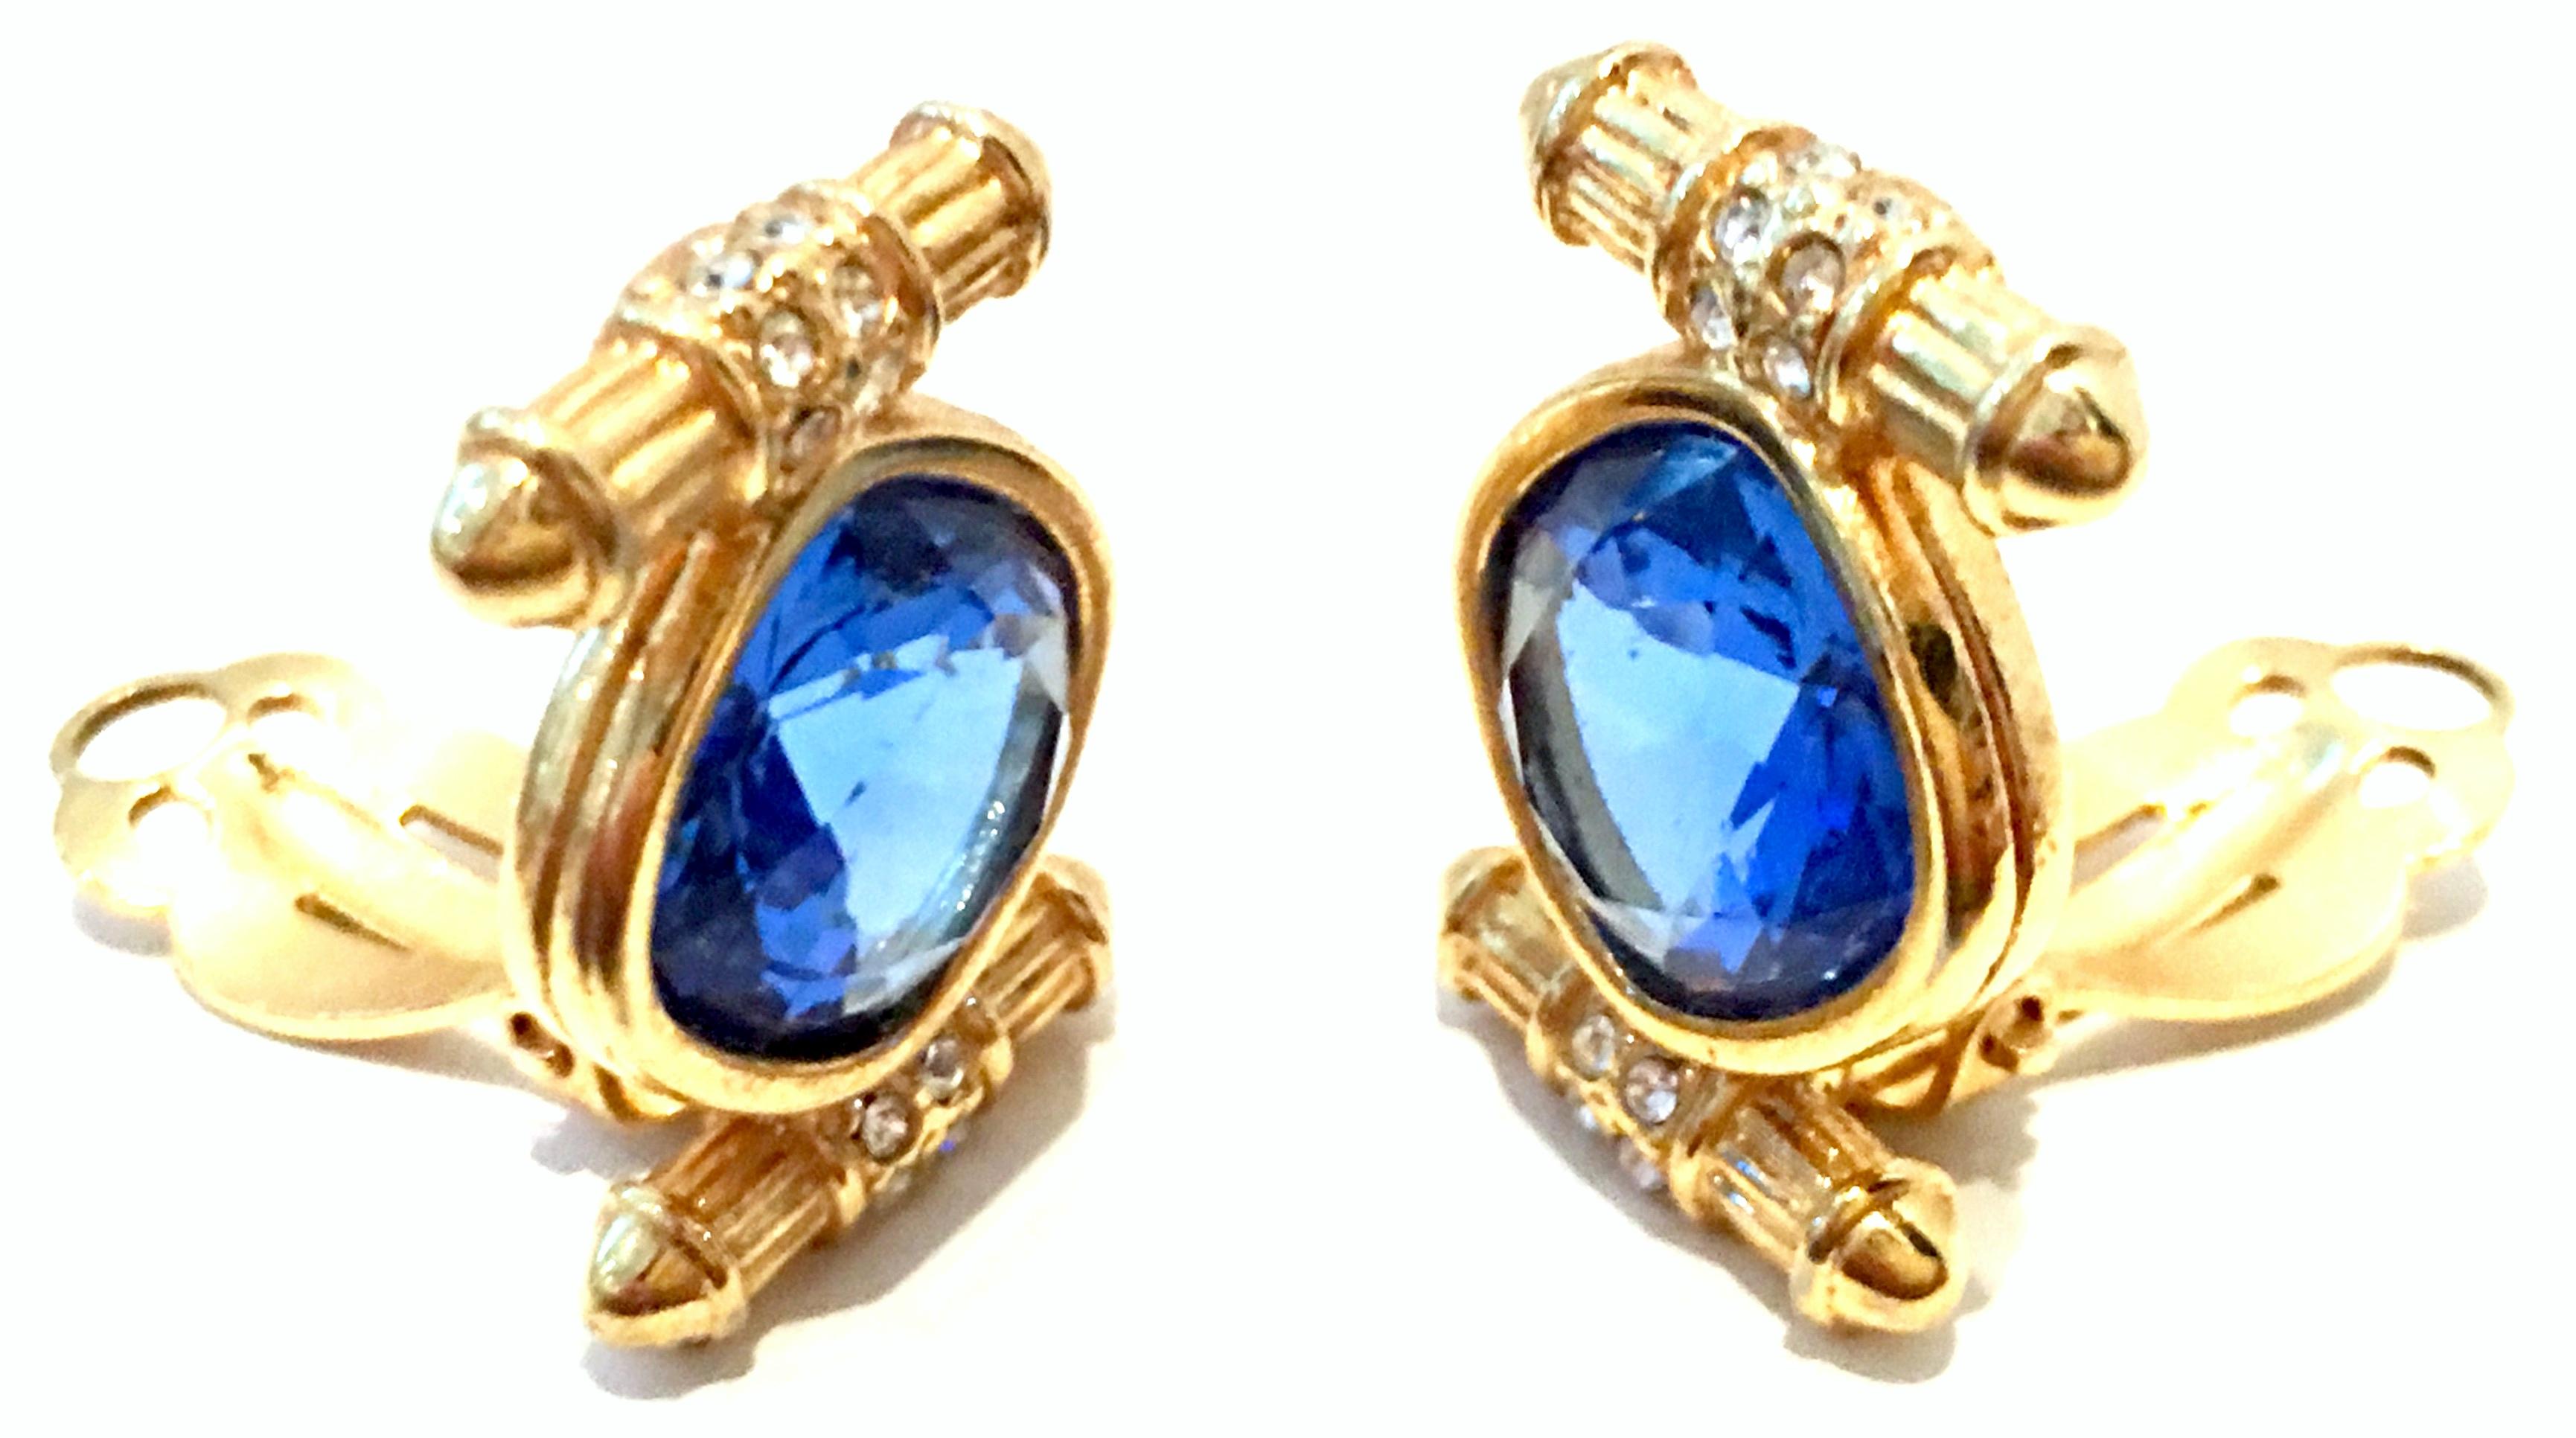 20th Century Pair Of Christian Dior Style Gold Plate & Blue Sapphire Brilliant cut and faceted Austrian crystal clip style earrings. There are round colorless cut and faceted Austrian crystal stone detail at each end of each earring. The large blue